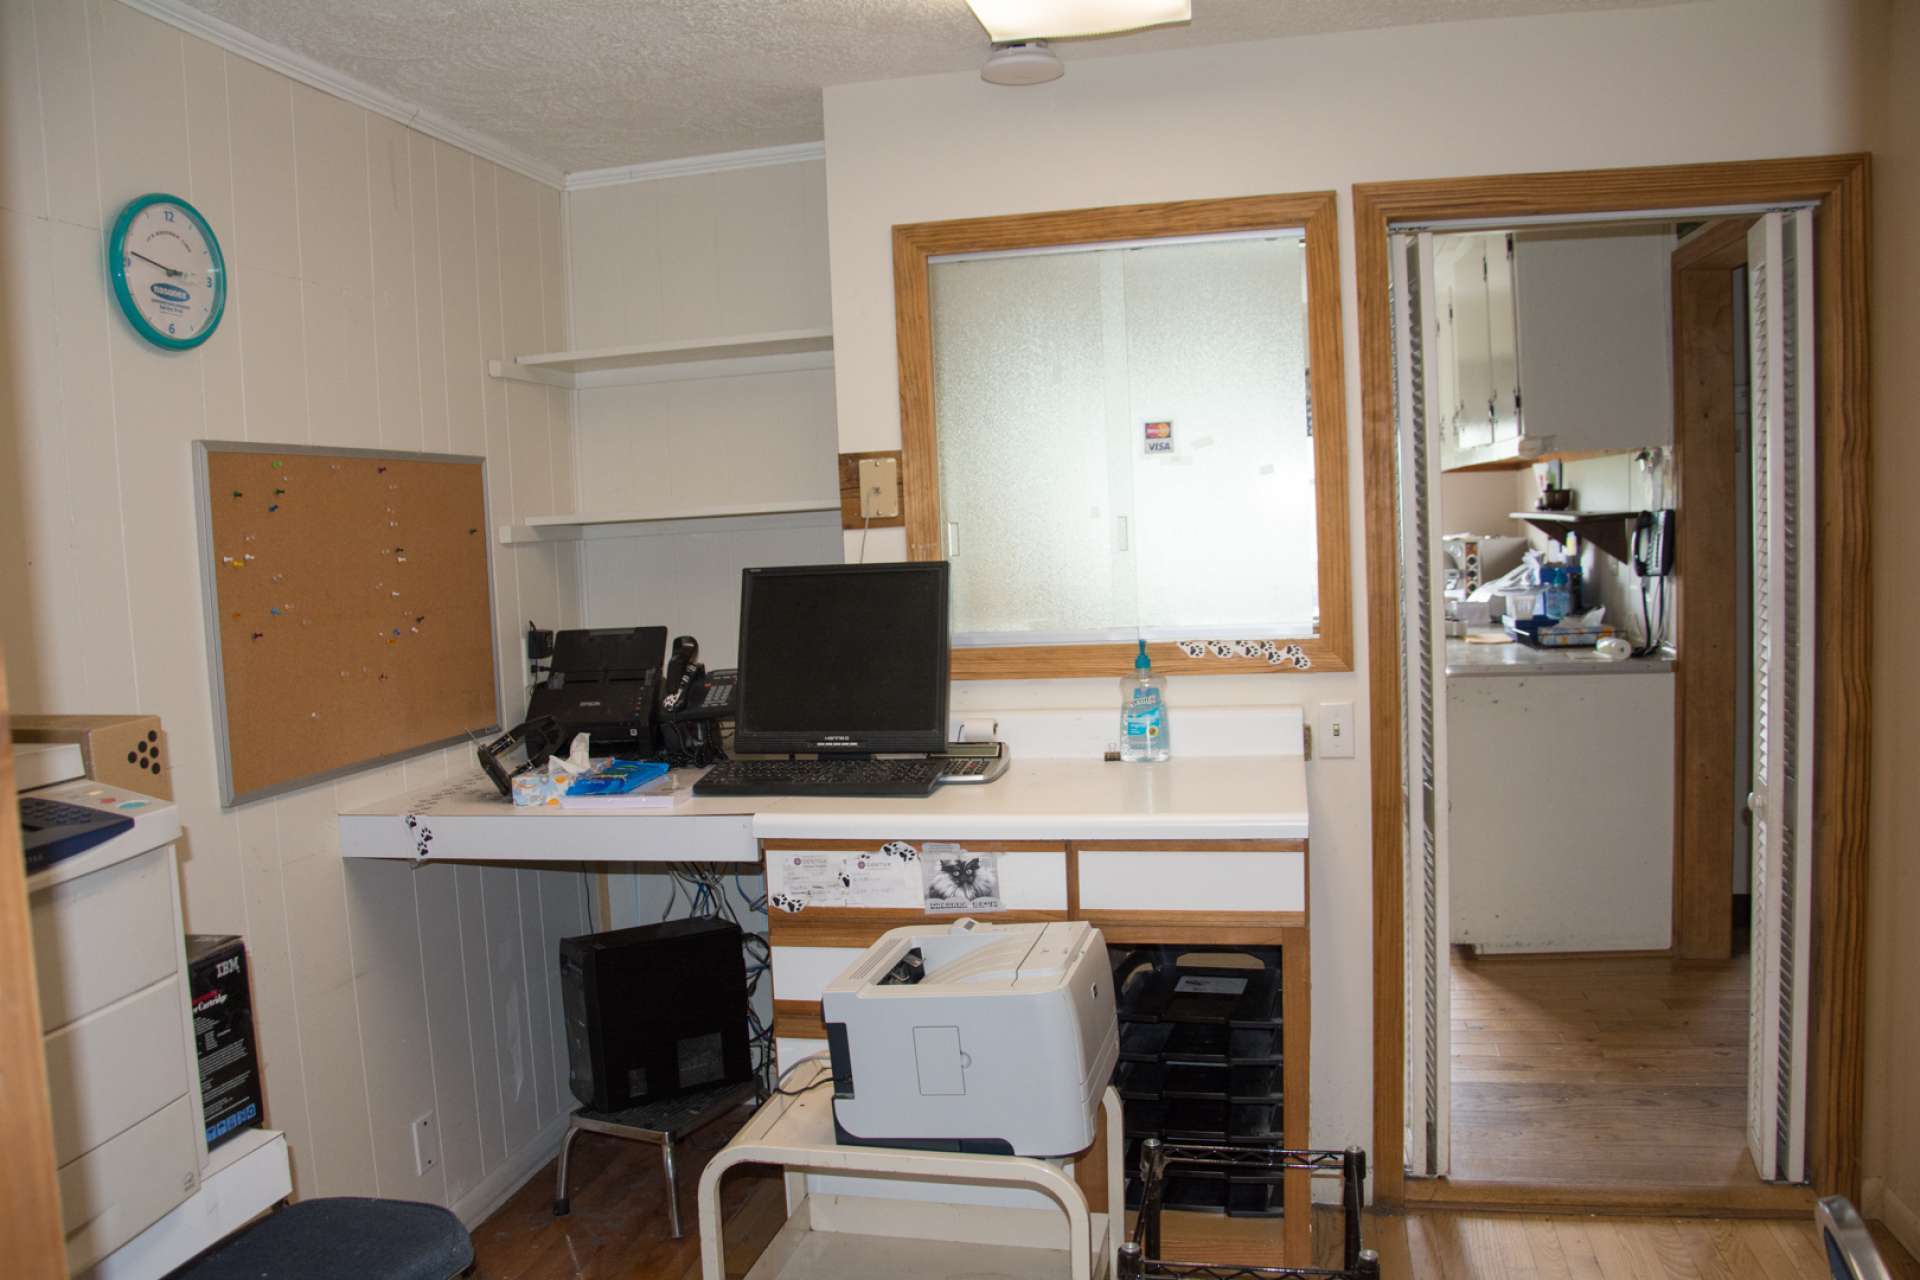 There are two offices with check in or out windows, and a file room with shelving and storage closet.